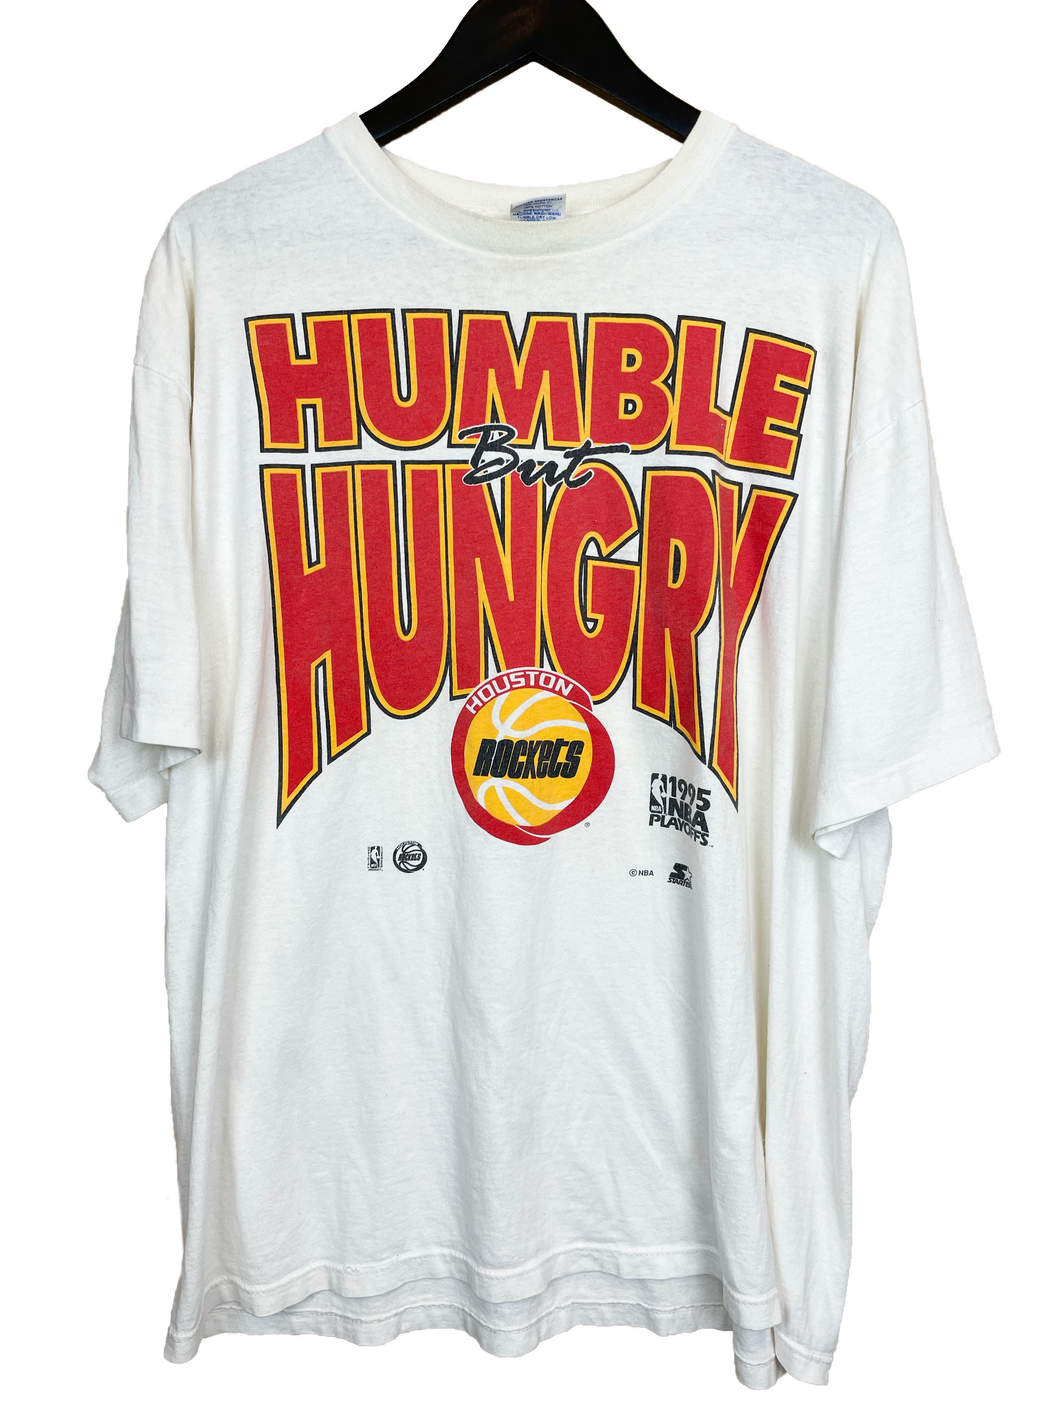 1995 HOUSTON ROCKETS HUMBLE BUT HUNGRY 'SS' TEE - XL